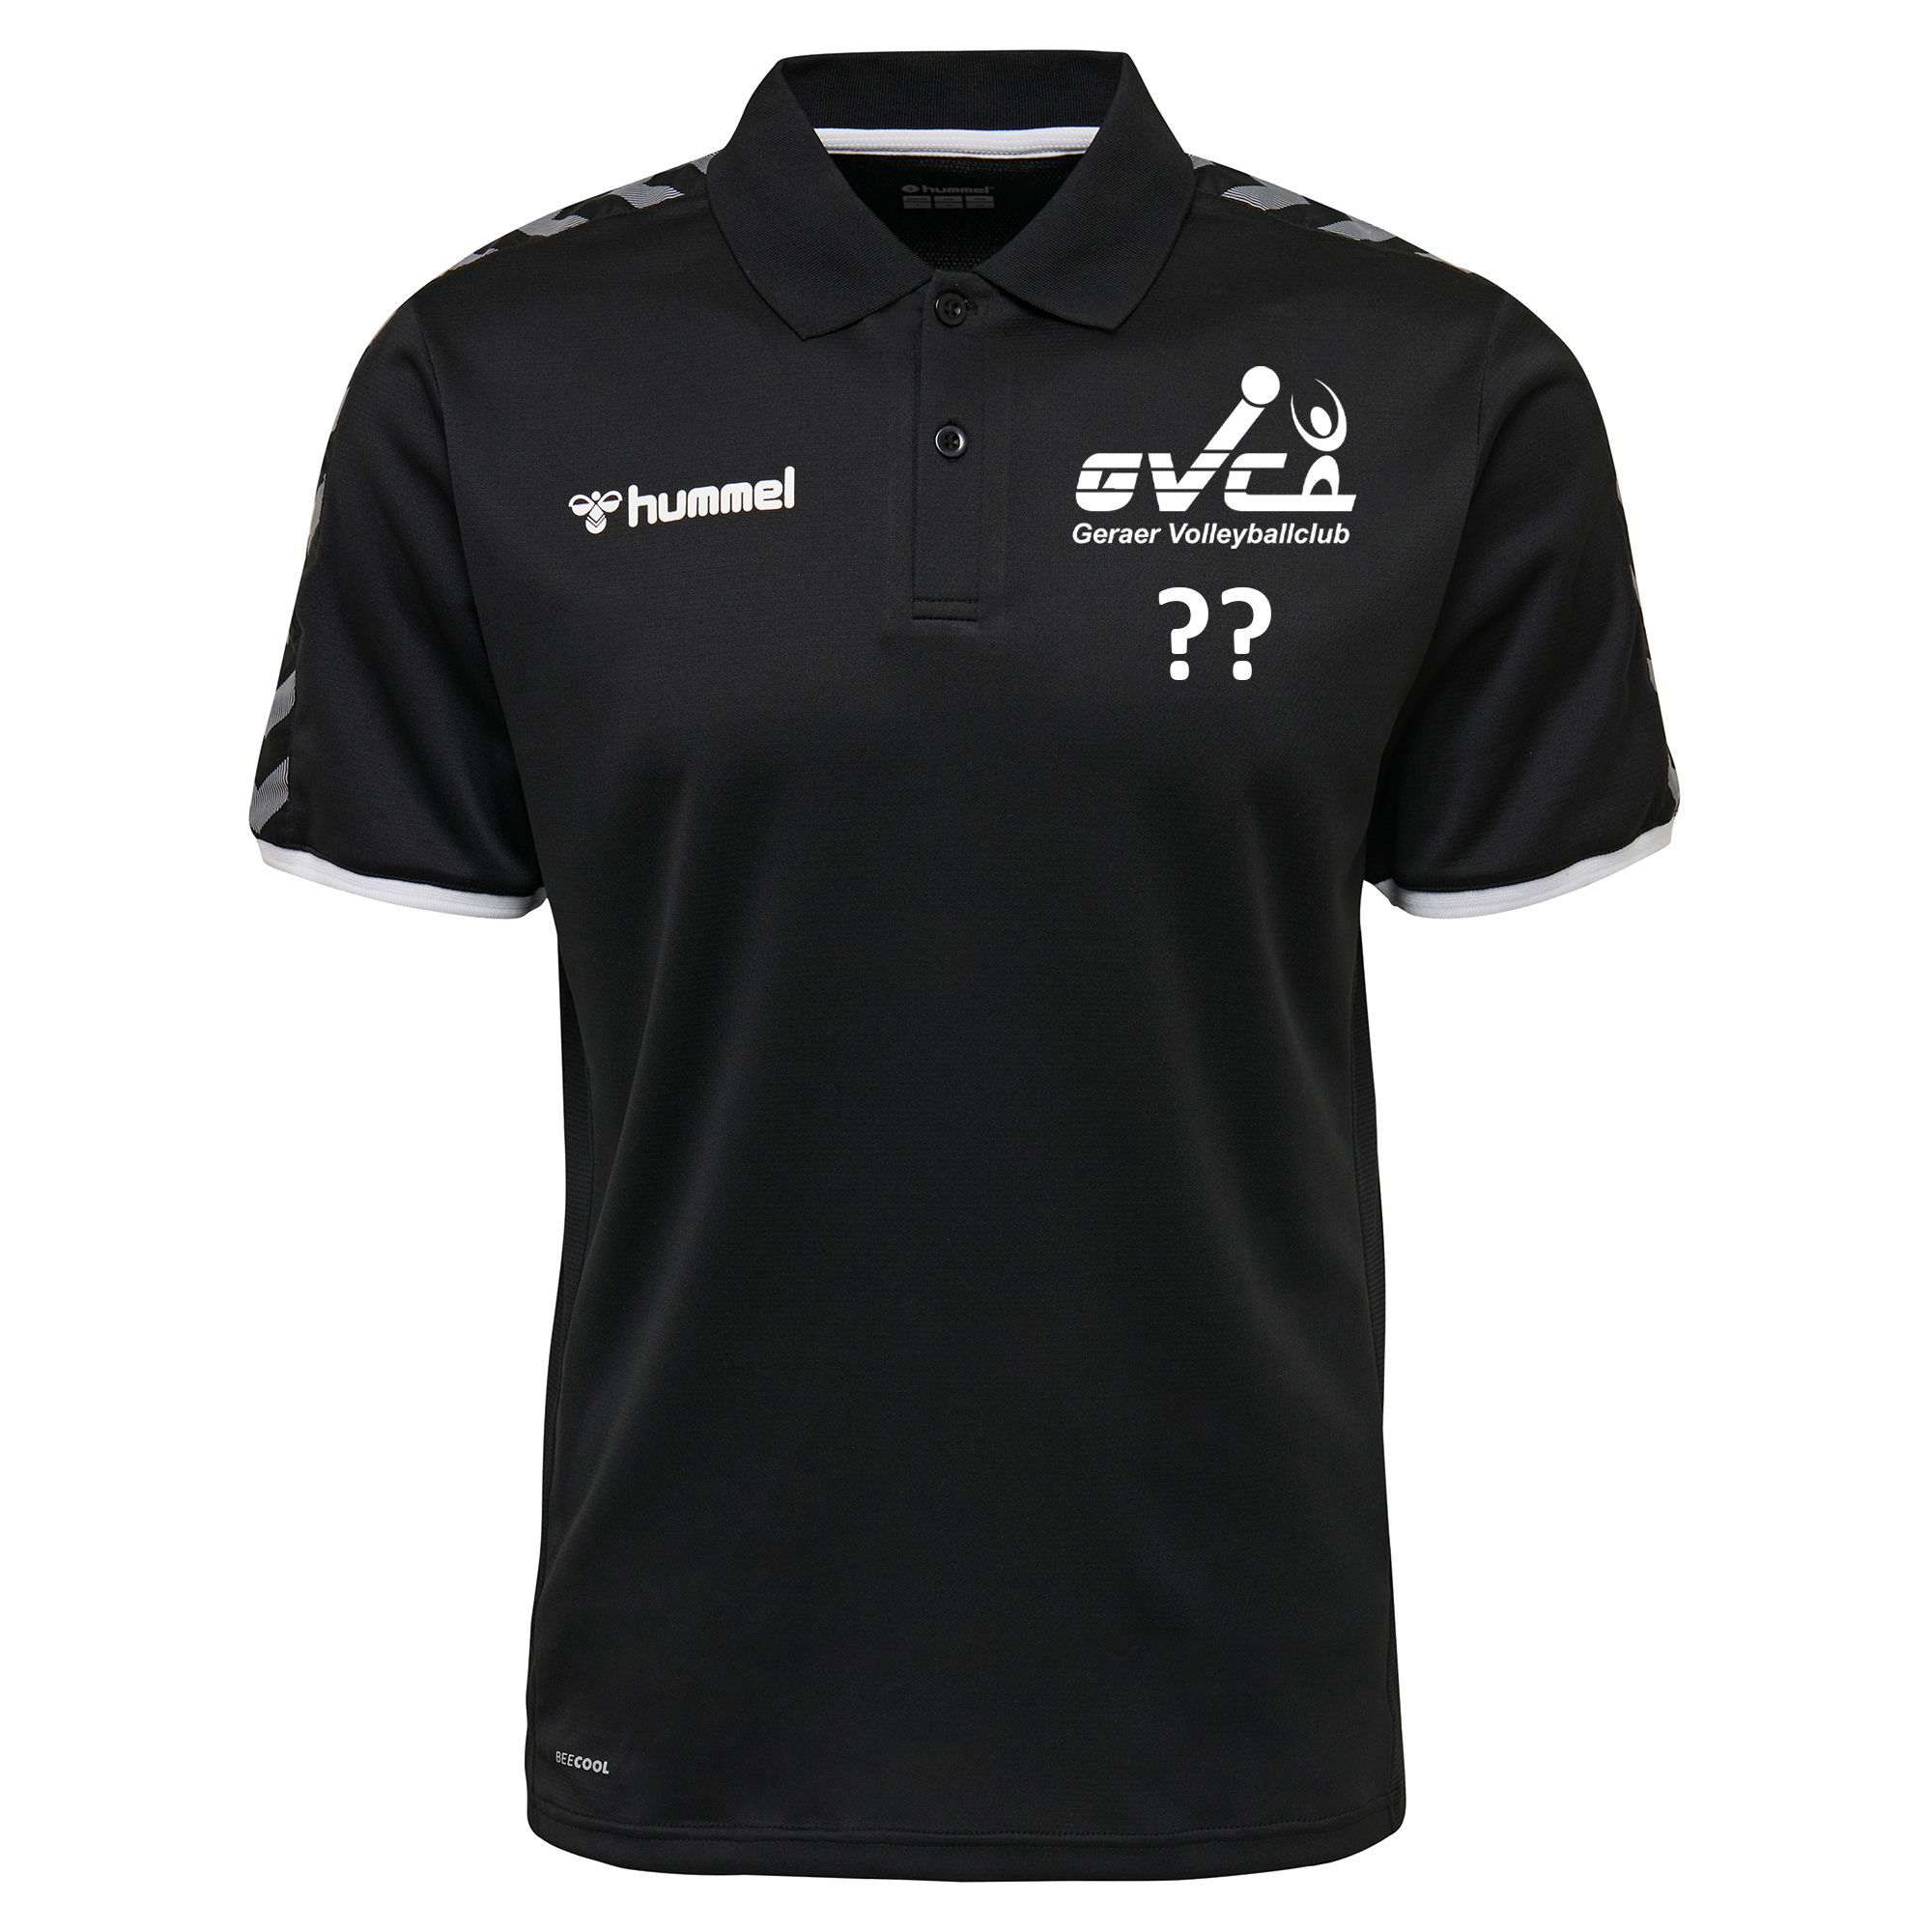 Geraer VC Functional Polo